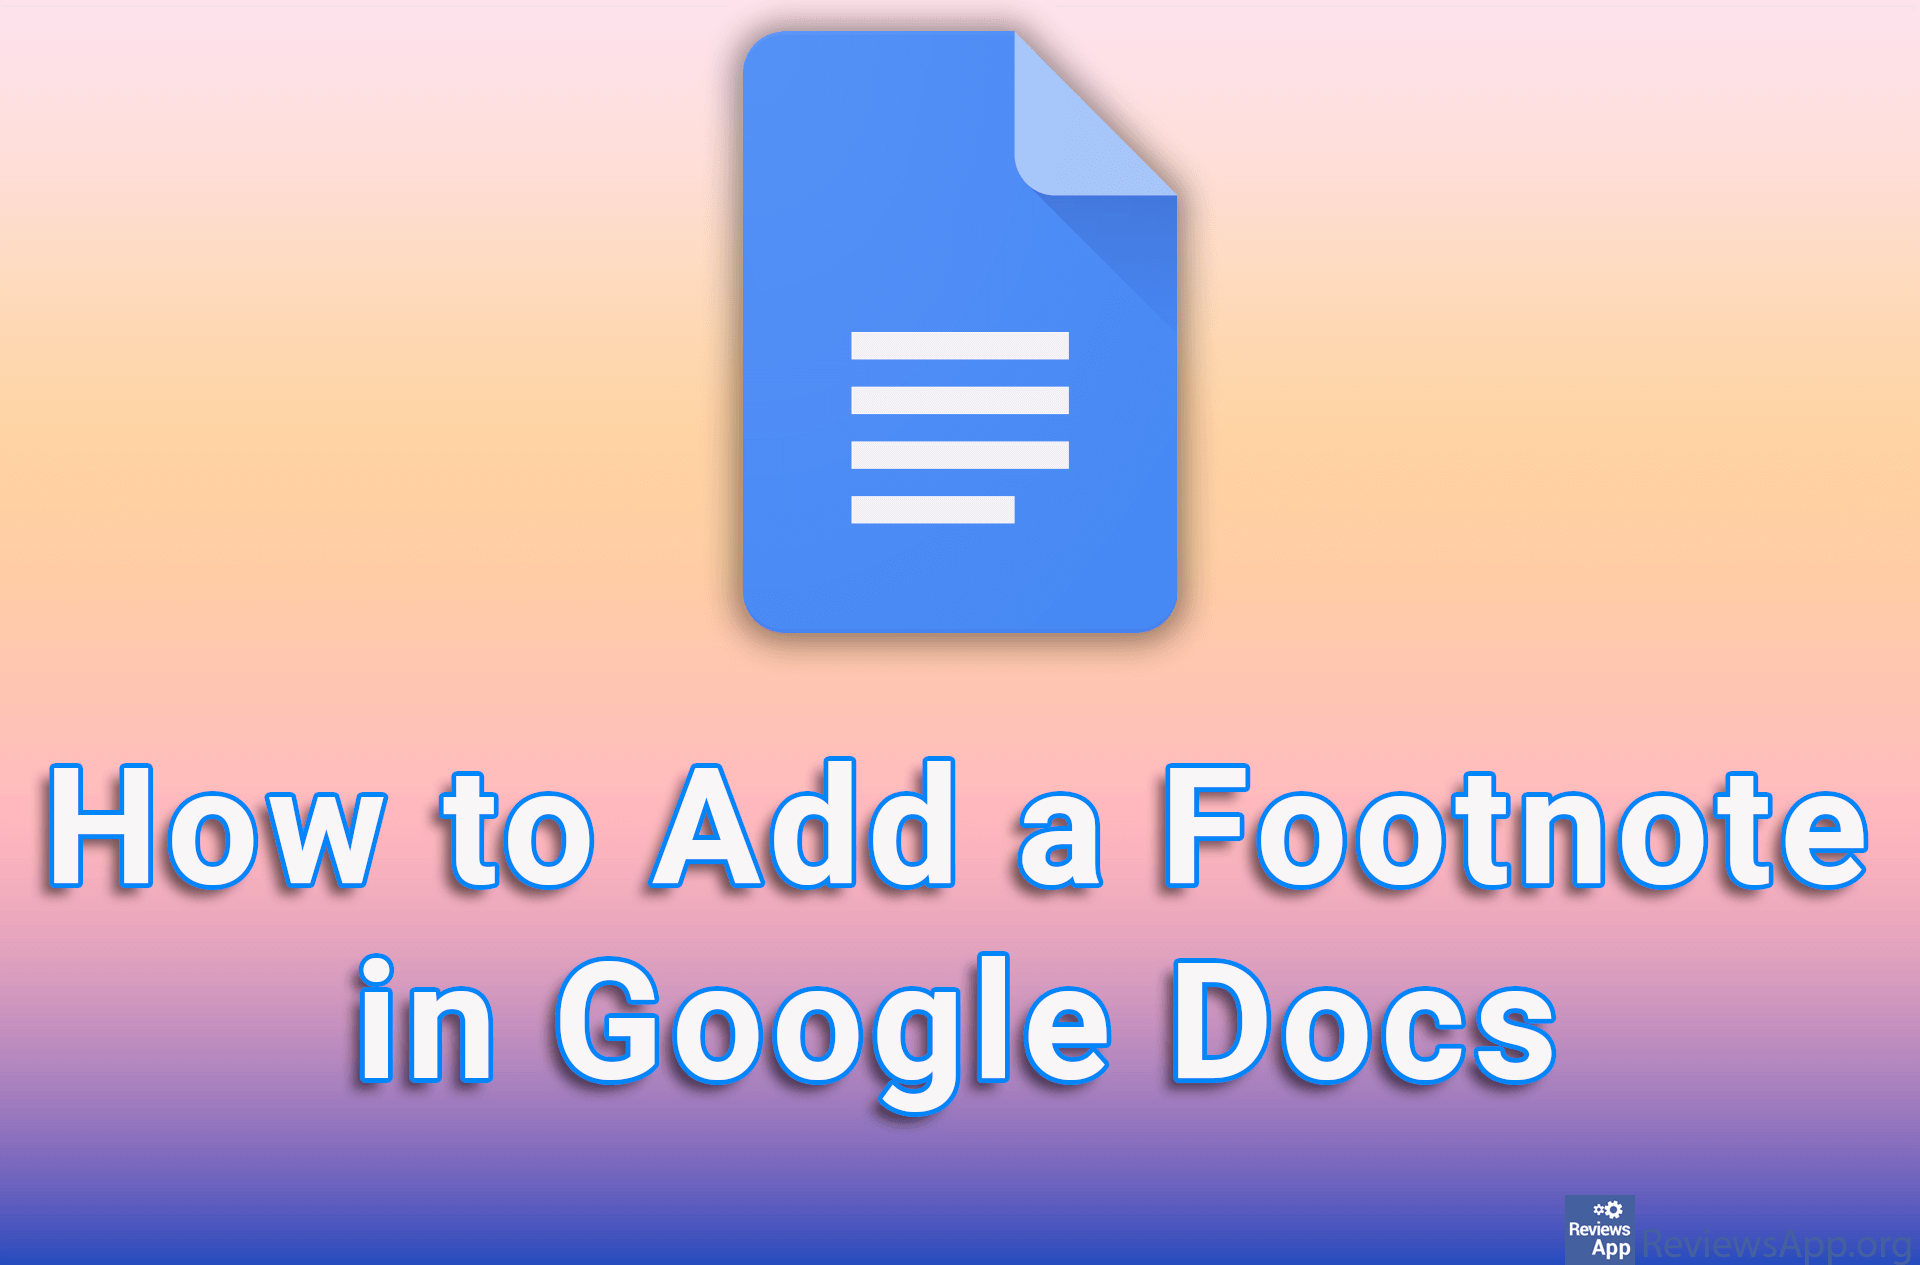 How to Add a Footnote in Google Docs